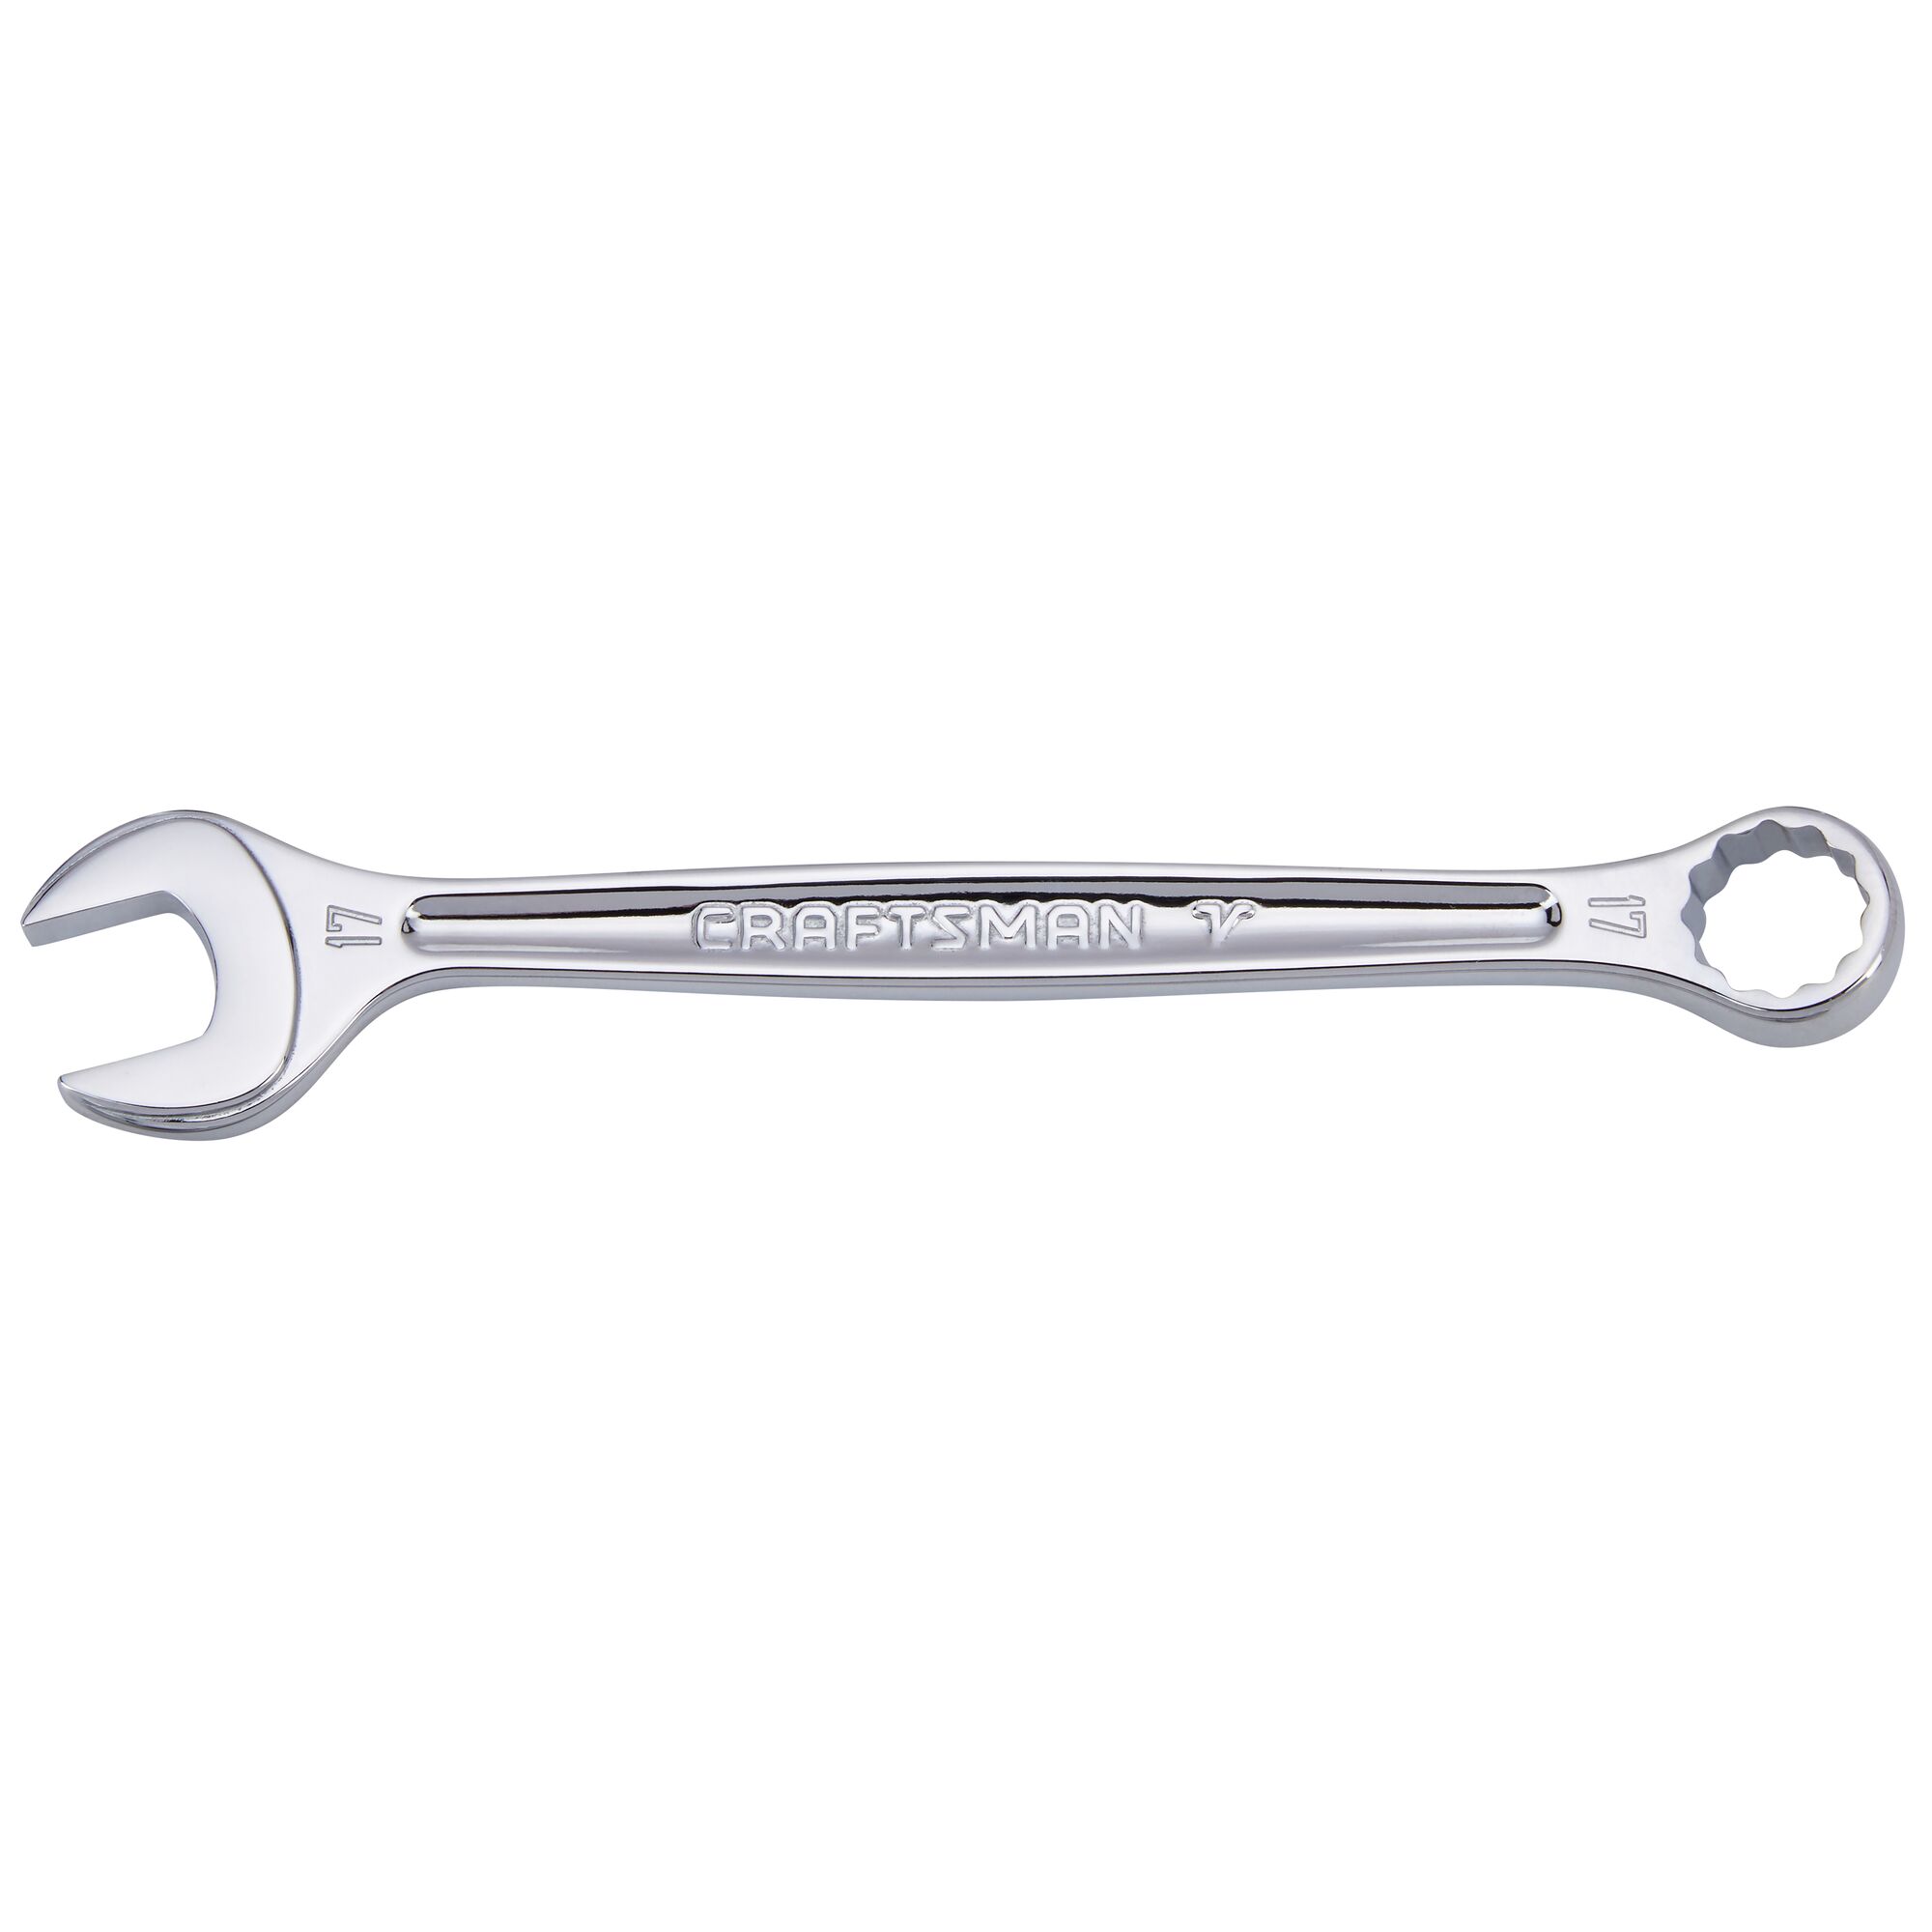 CRAFTSMAN V-SERIES Combo Wrench 17MM 